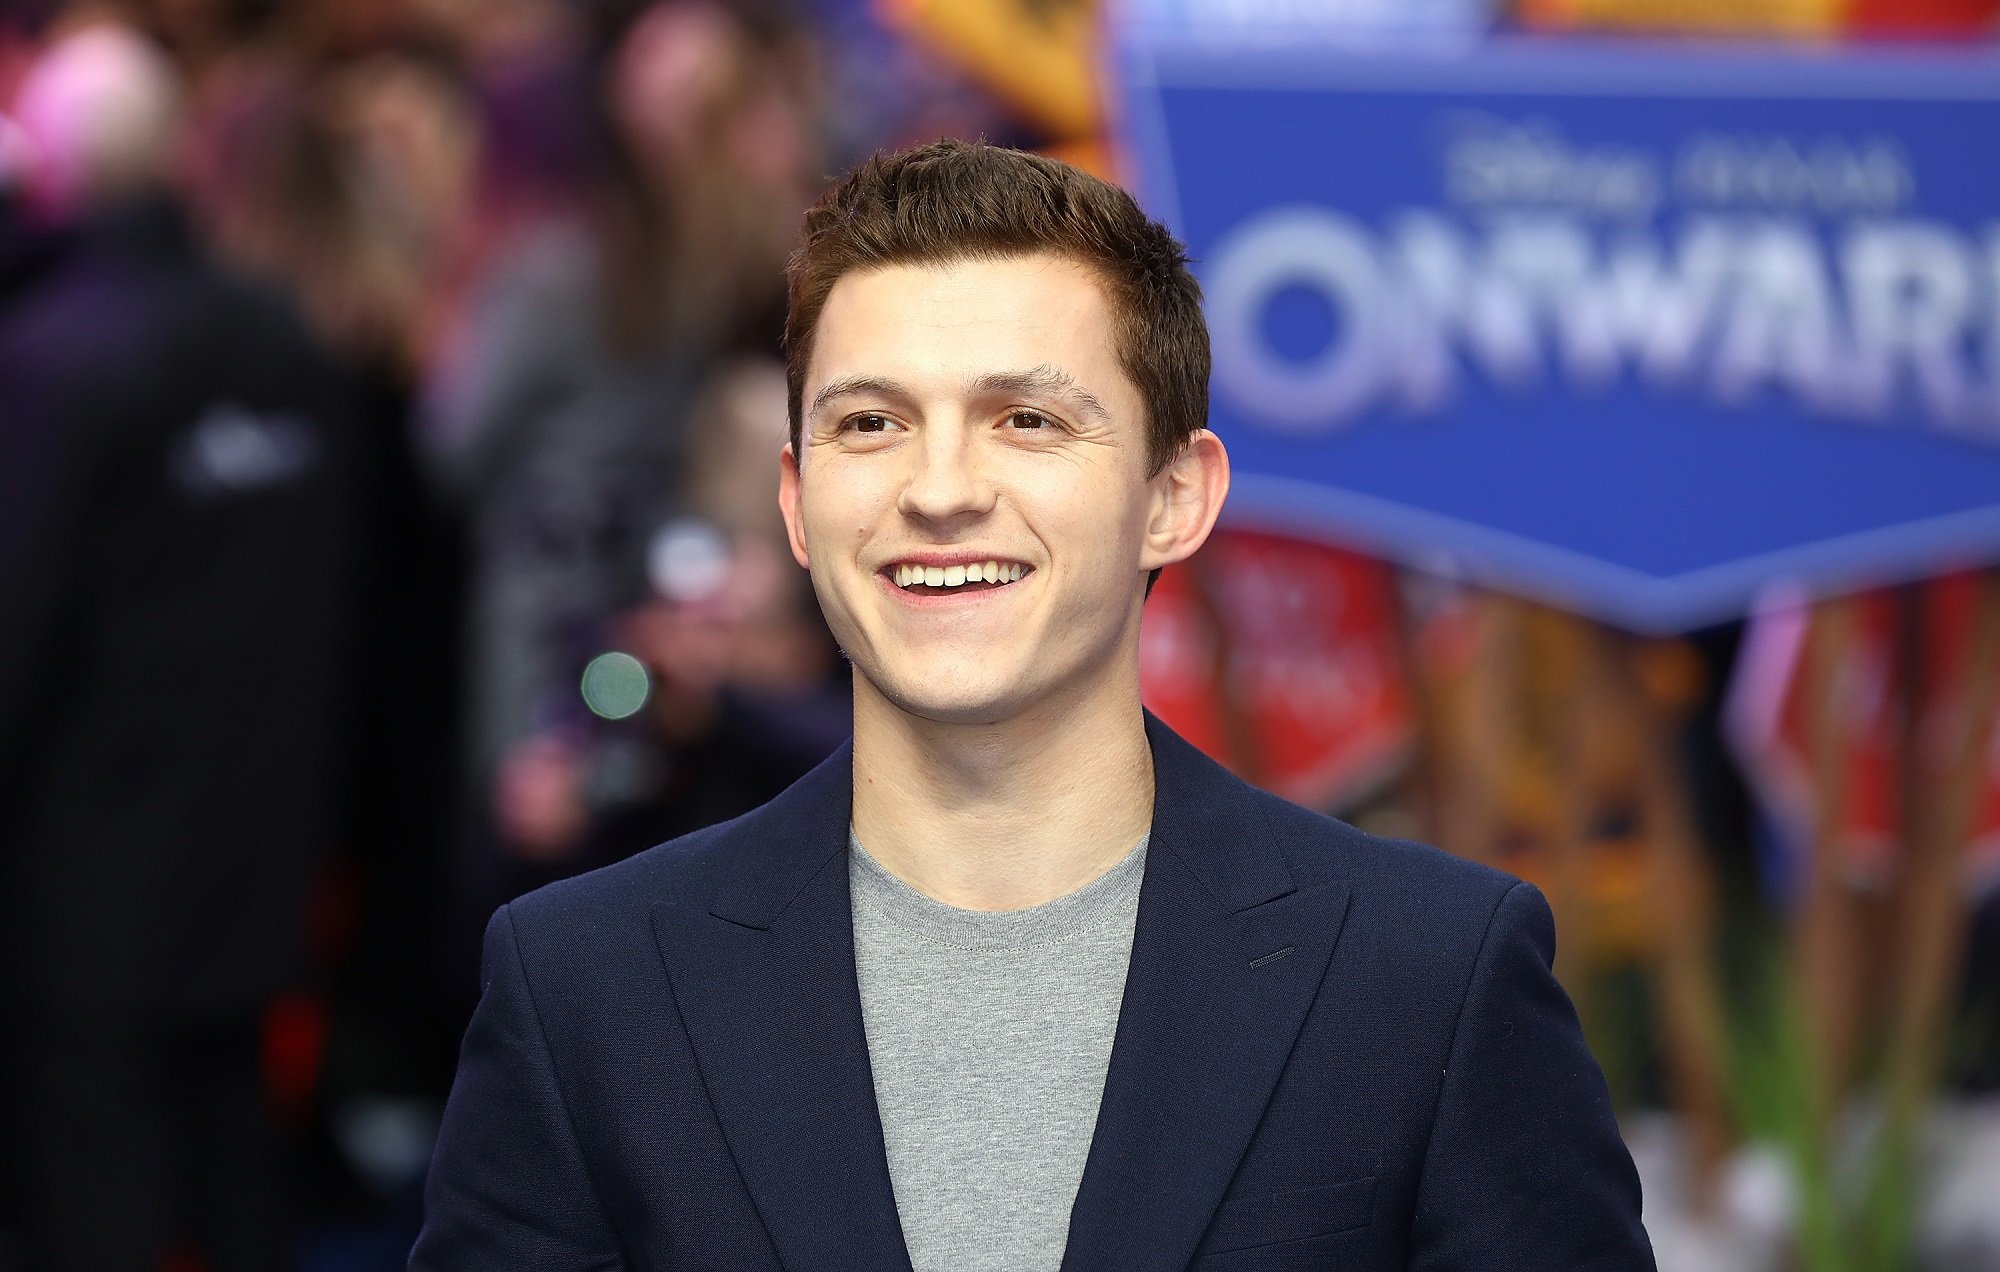 Tom Holland smiles while attending the "Onward" UK Premiere in 2020